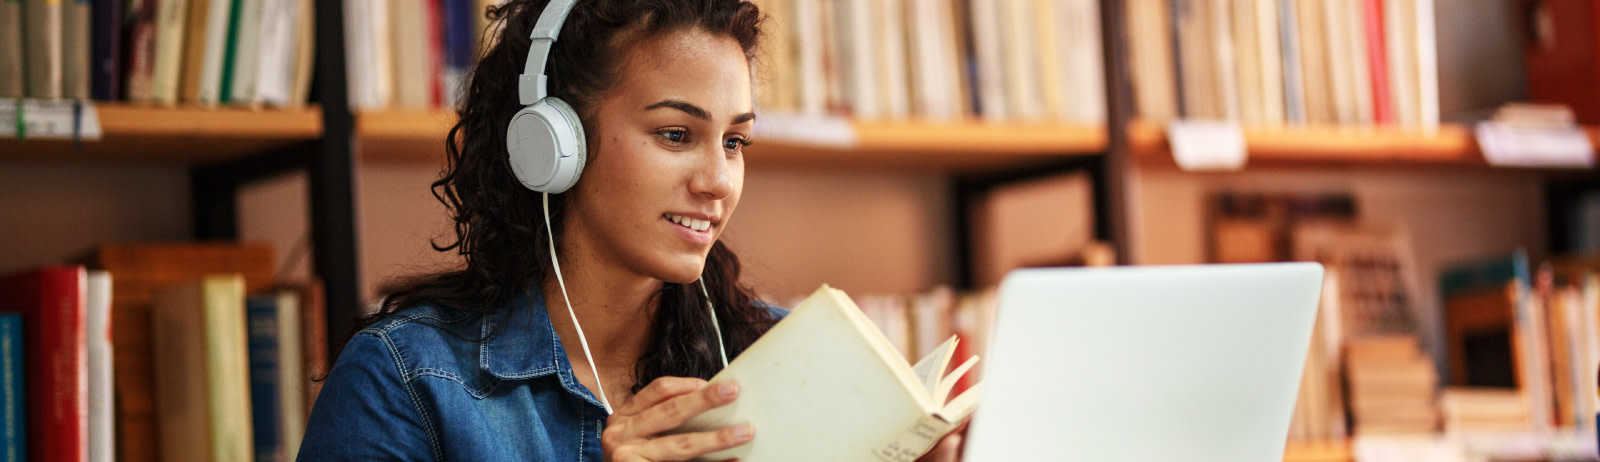 Female IELTS test taker listening to an audio clip during an IELTS on computer session